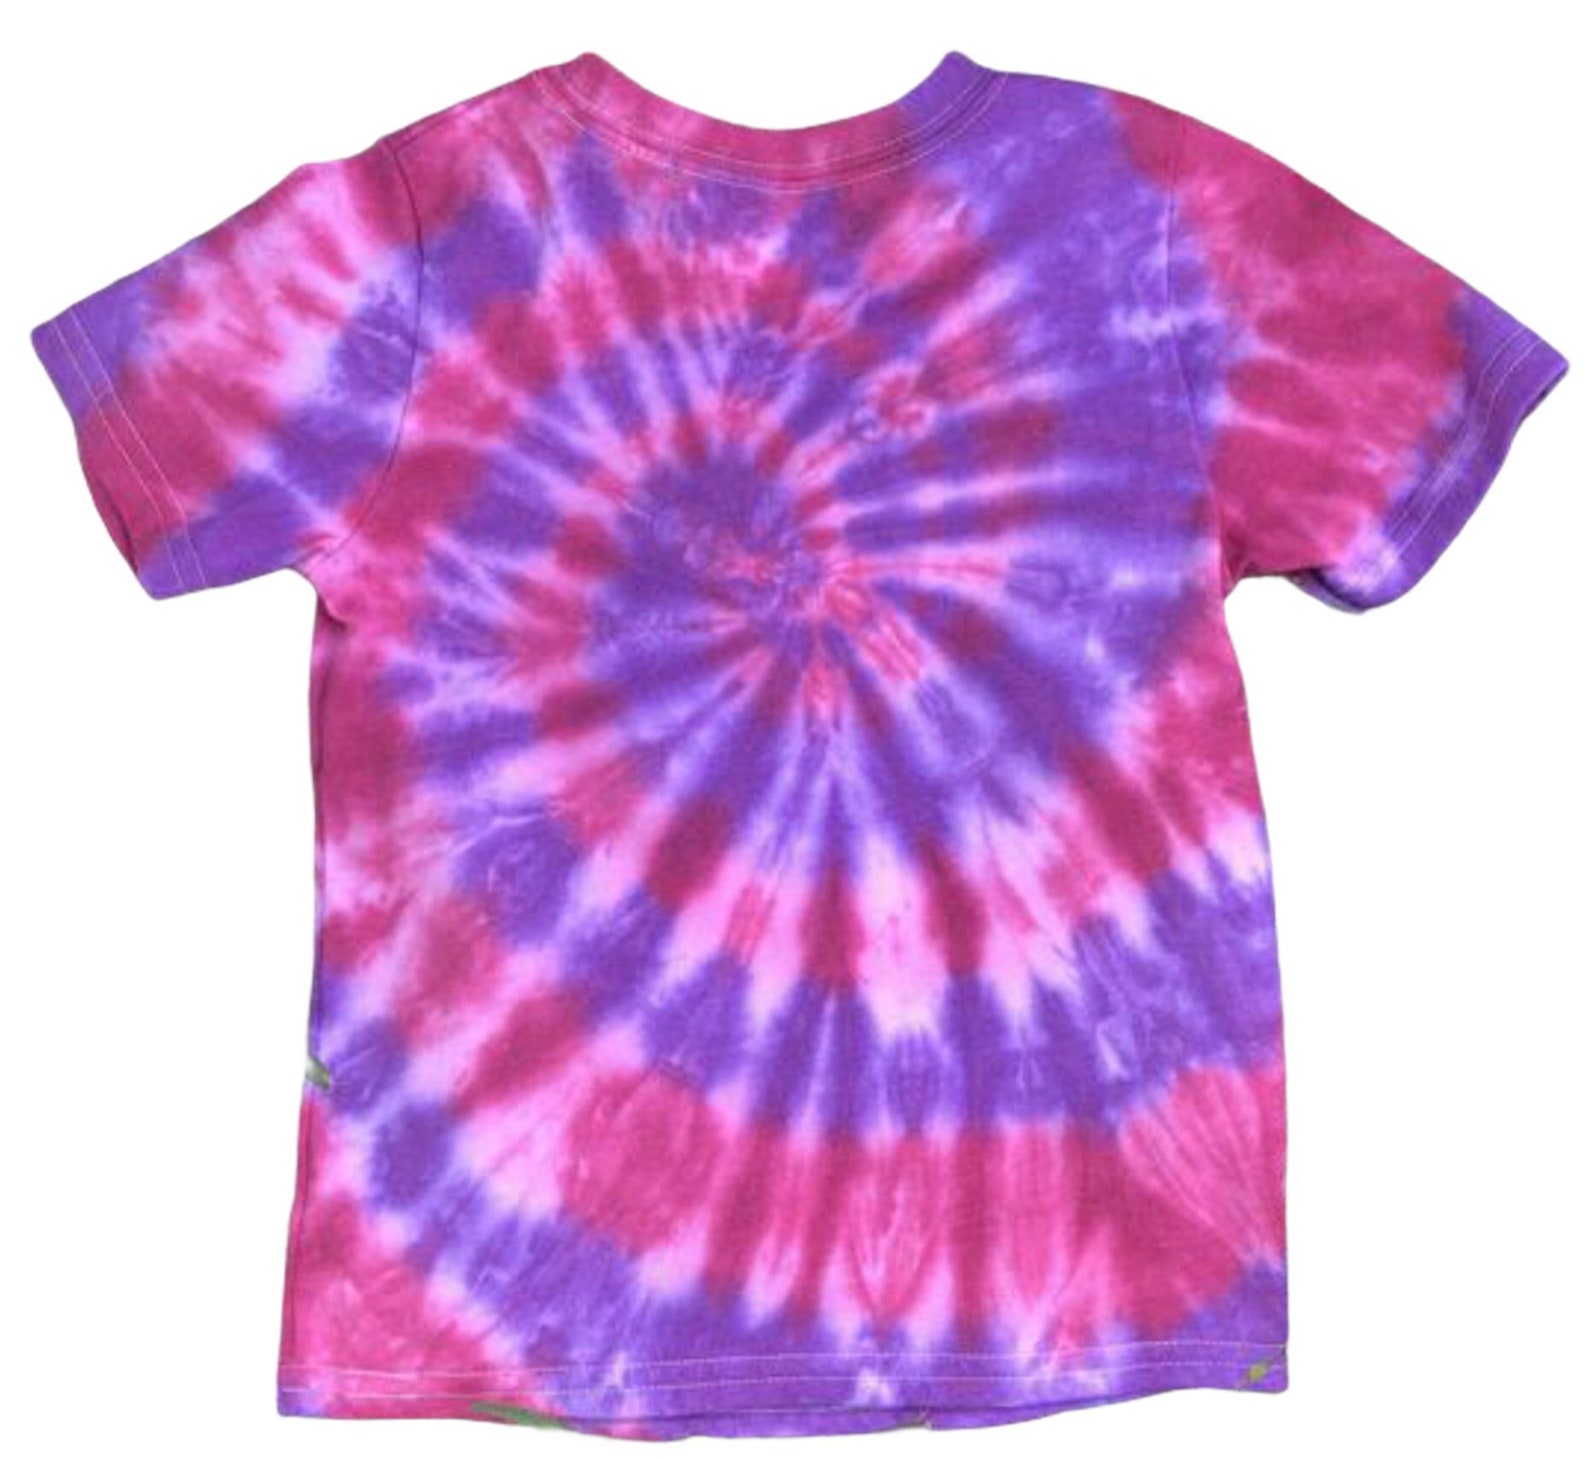 Pink and Purple Tie-dye T-shirt Toddler Size 4T Crew Neck - Etsy